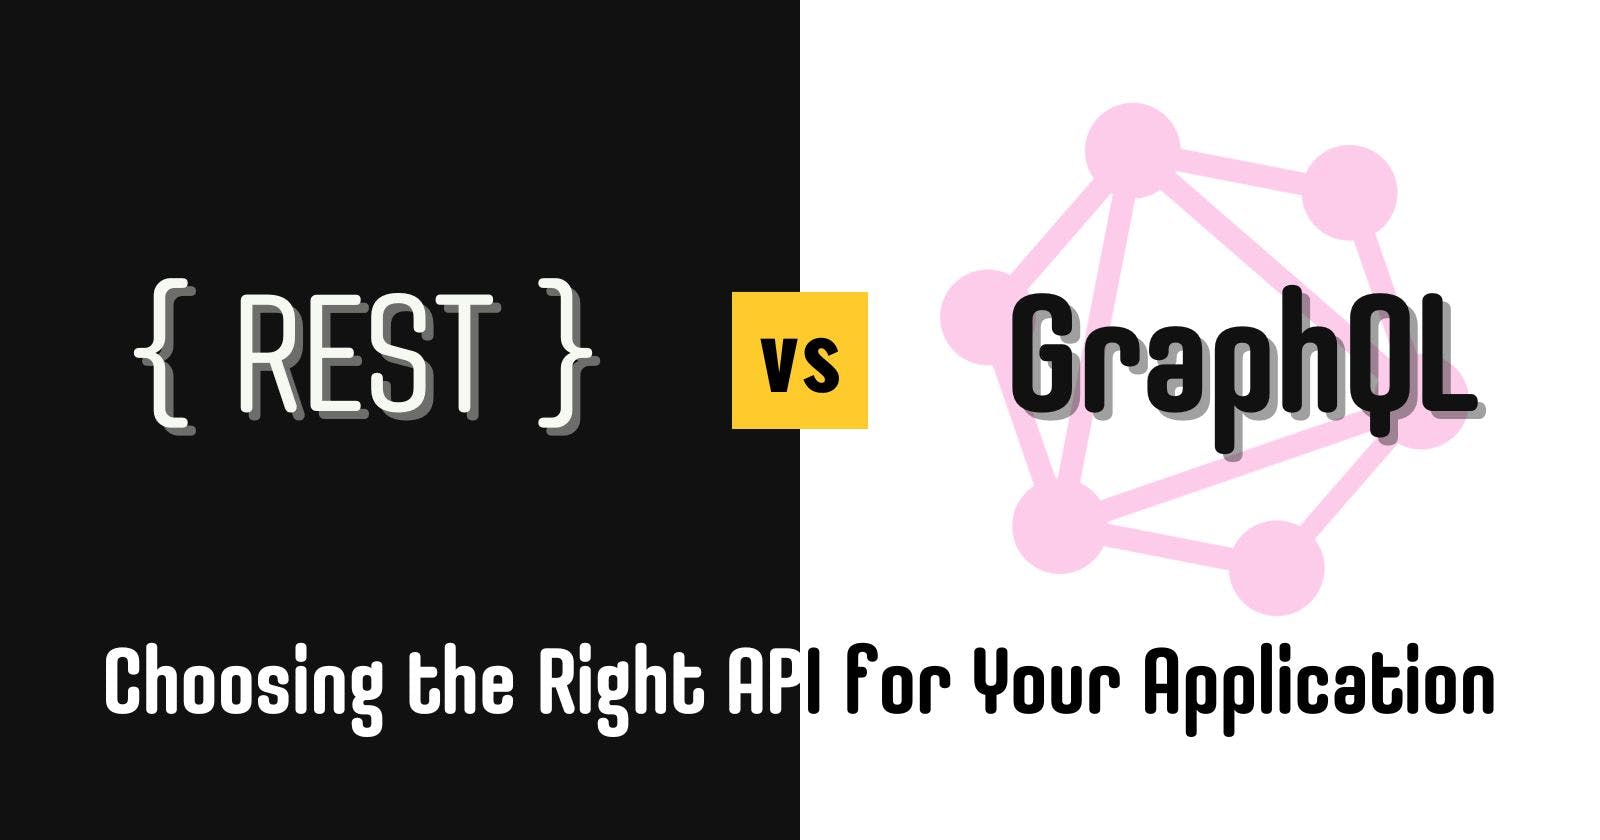 REST vs. GraphQL: Choosing the Right API for Your Application